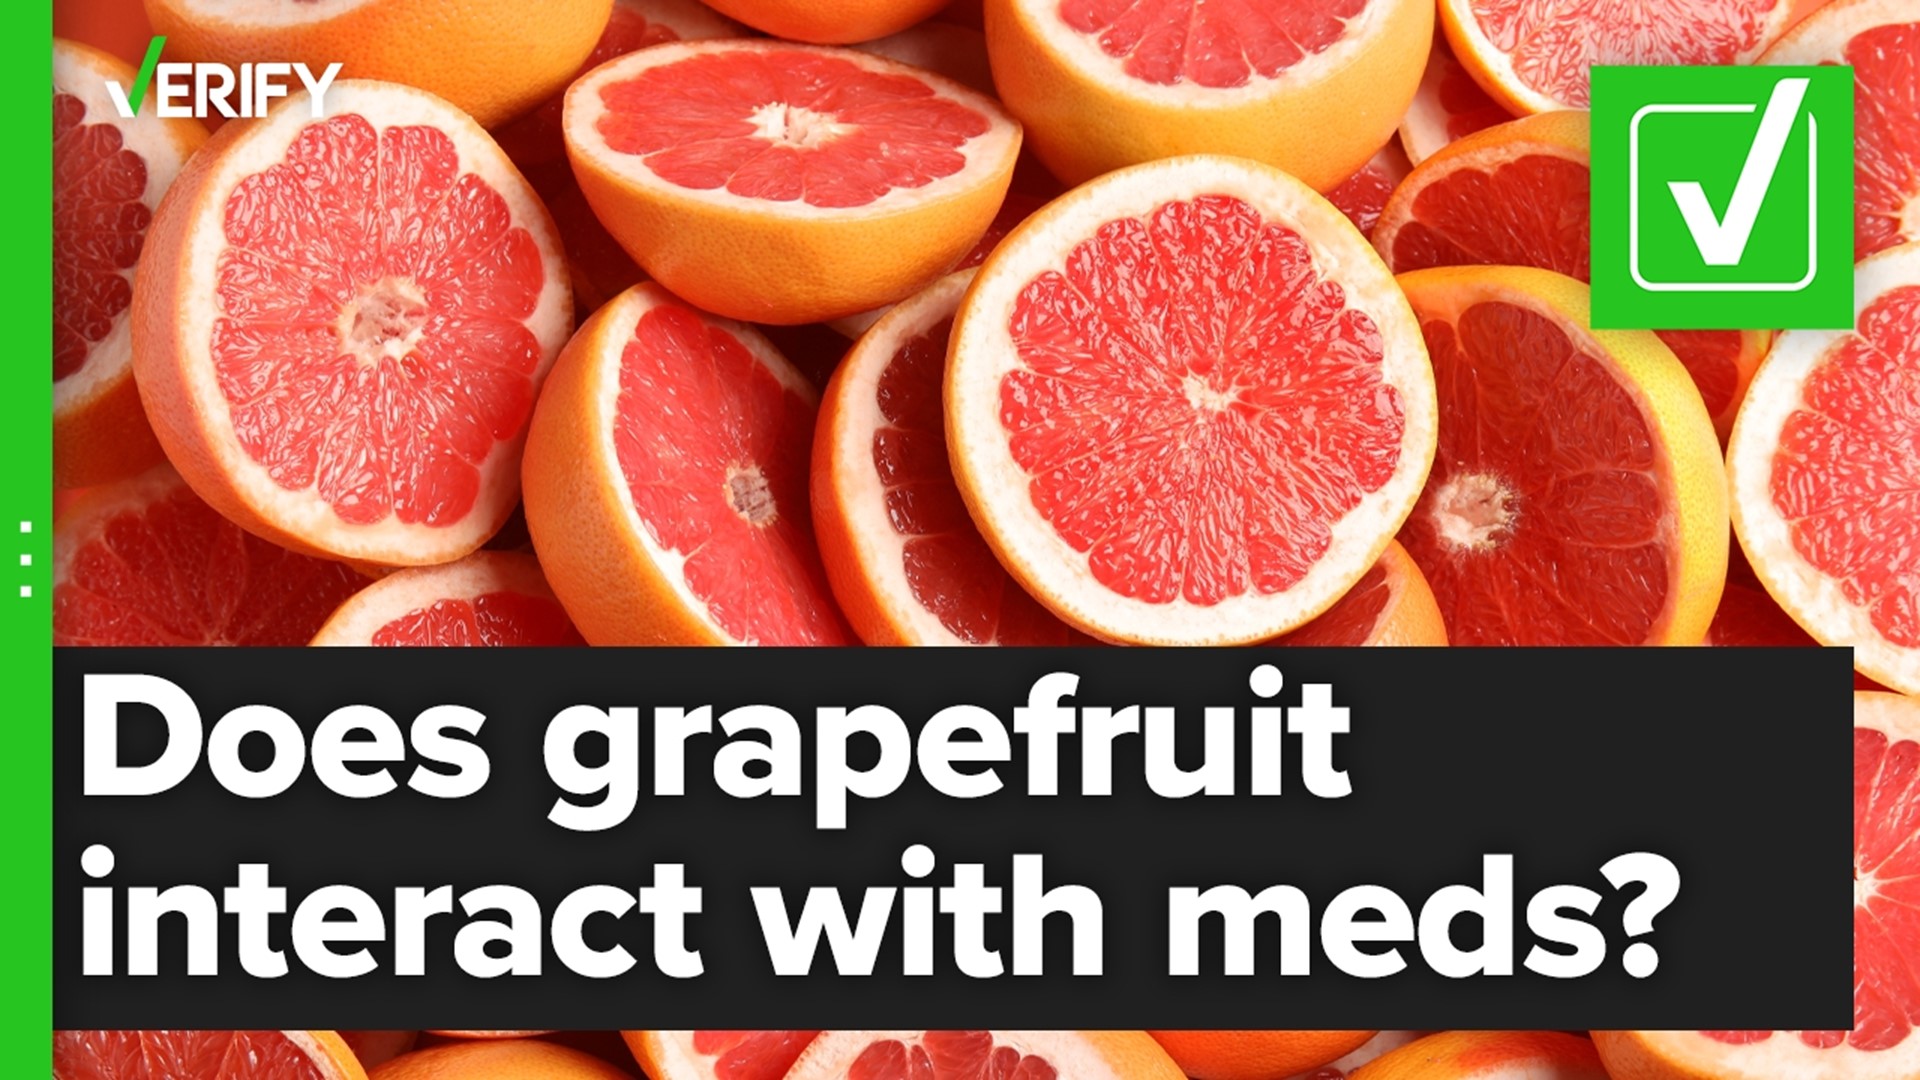 Grapefruit and grapefruit juice are packed with vitamin C and potassium, but health experts say they can interfere with several kinds of prescription medications.